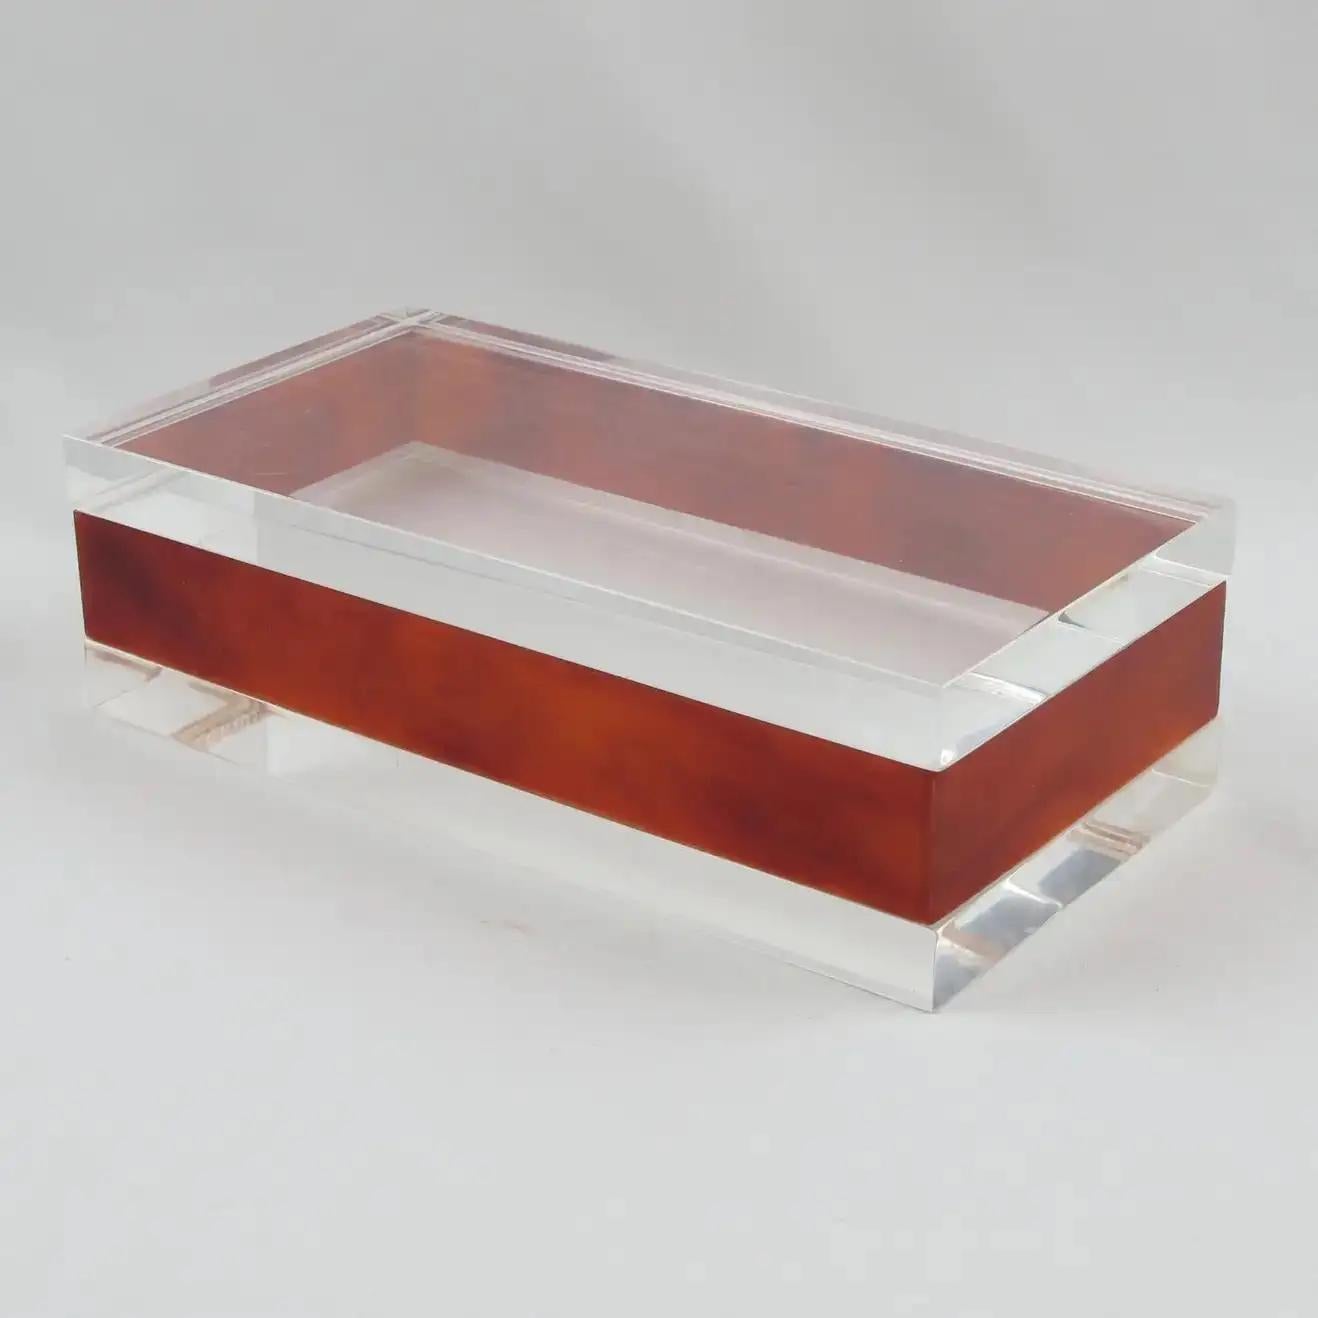 This stunning modernist Lucite, acrylic lidded box was crafted in France in the 1970s. The piece boasts transparent and red tea amber marble colors with a geometric rectangular shape and contrasting design. There is no visible maker's